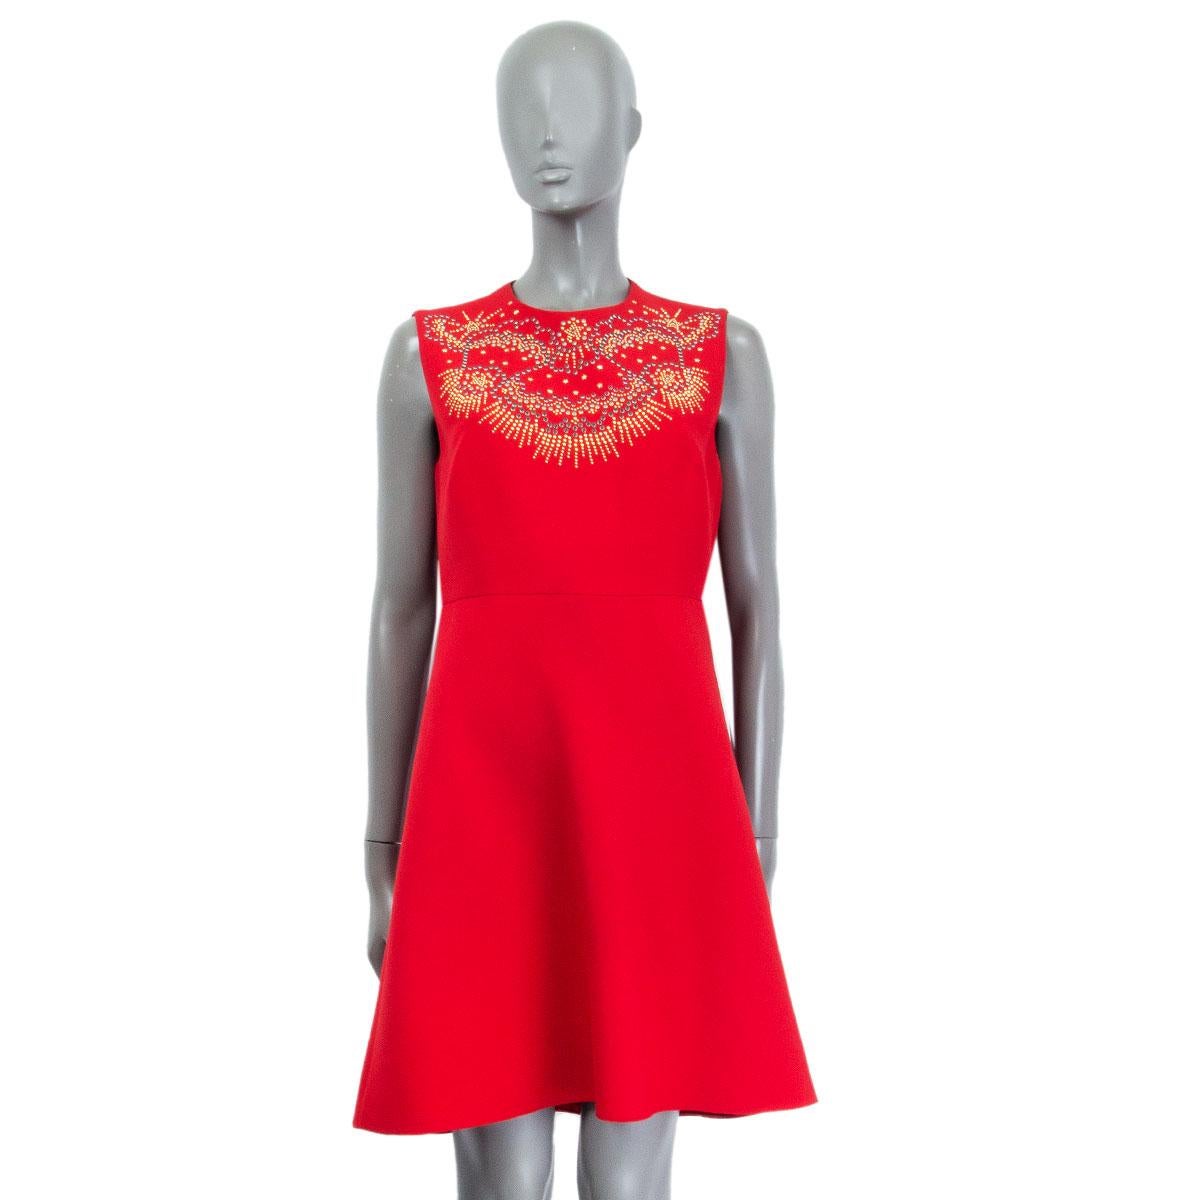 authentic Valentino sleeveless dress in red virgin wool 65% silk (35%) embellished with multicolor cabochon studs. Lined in red silk. Has been worn and is in excellent condition.

Tag Size 44
Size L
Shoulder Width 36cm (14in)
Bust 94cm